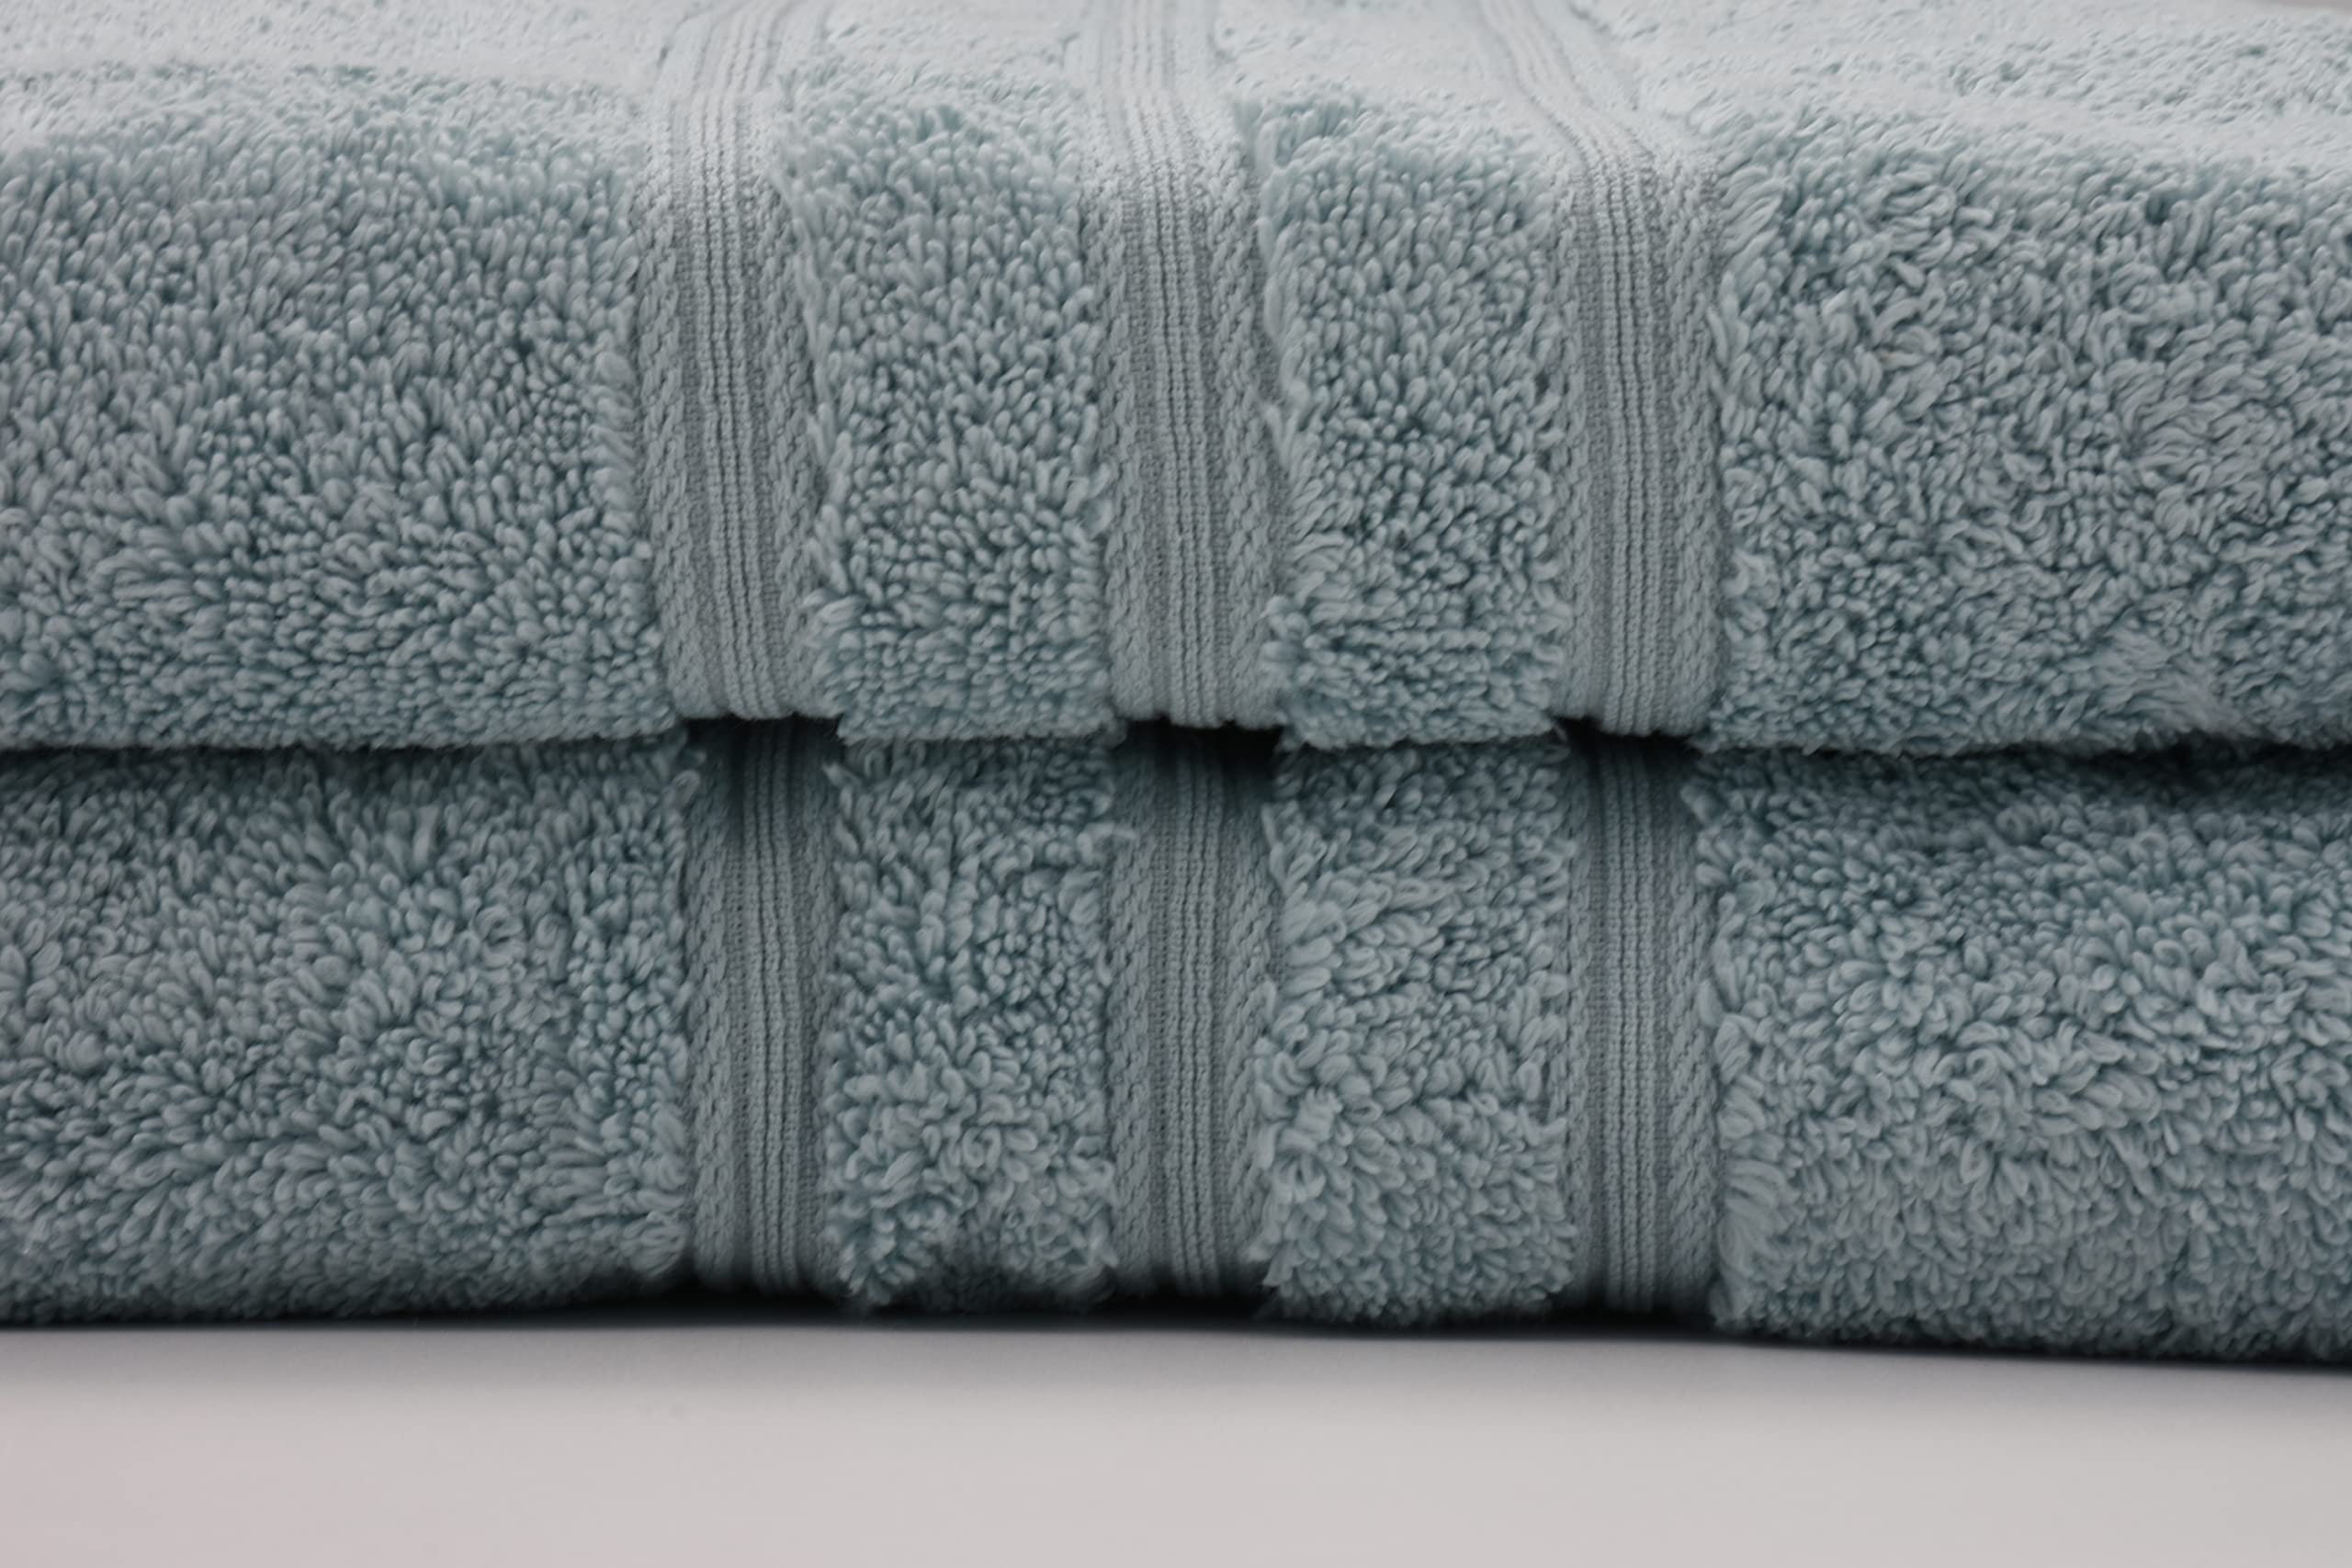 Pierre Donna Bath Towel, Highly Absorbent (sky blue)